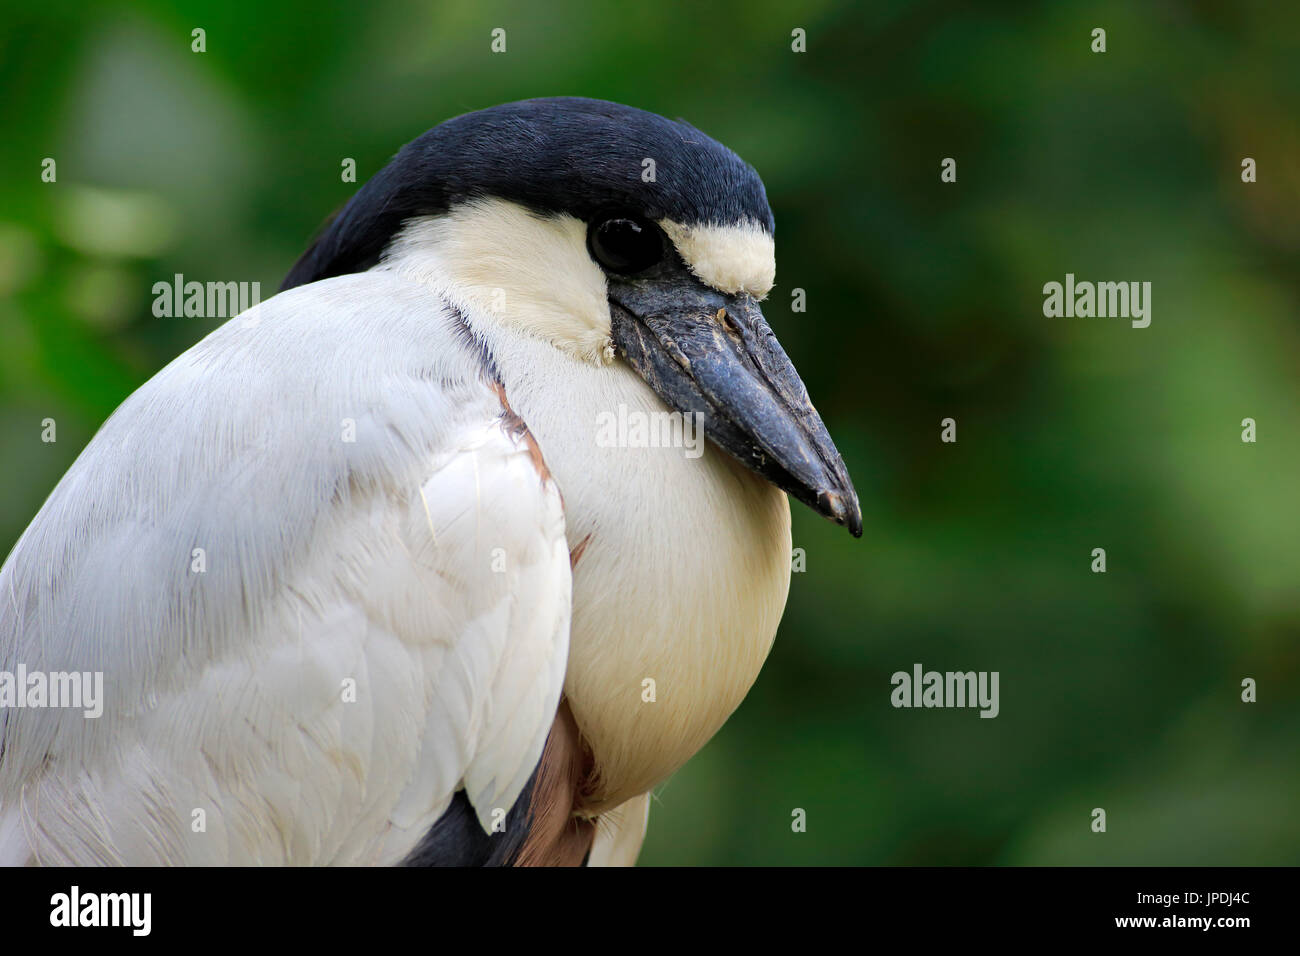 Boat-billed heron (Cochlearius cochlearius), adult, Portait, Pantanal, Brazil Stock Photo